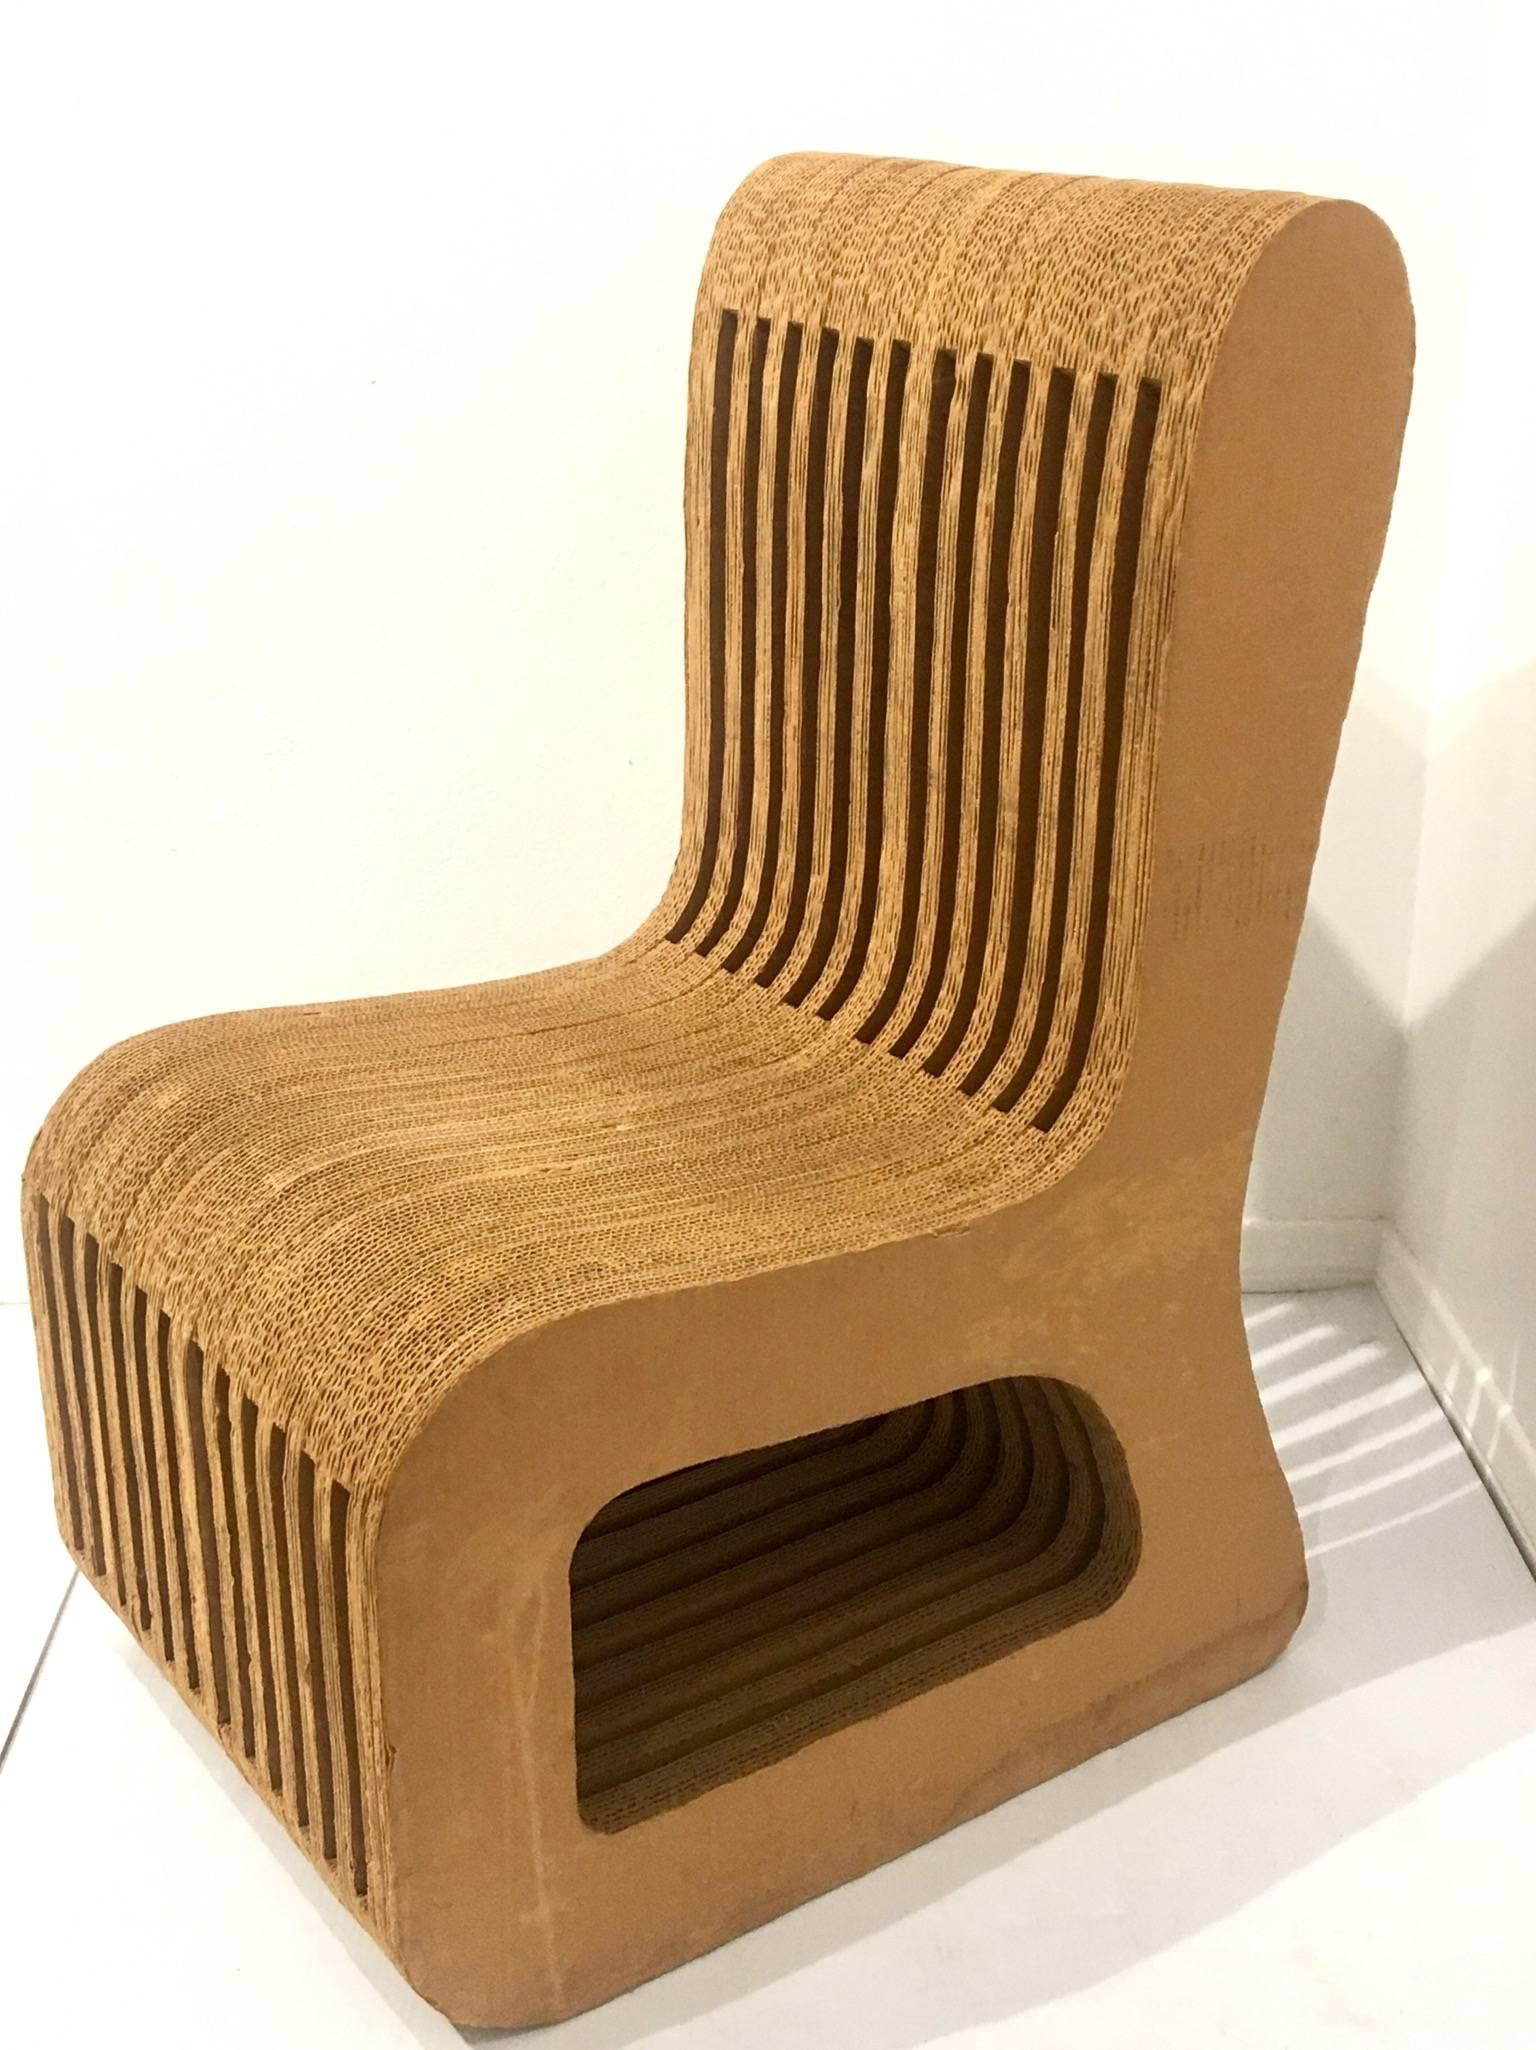 American Rare and Unique Chair in Cardboard Attributed to Frank Ghery